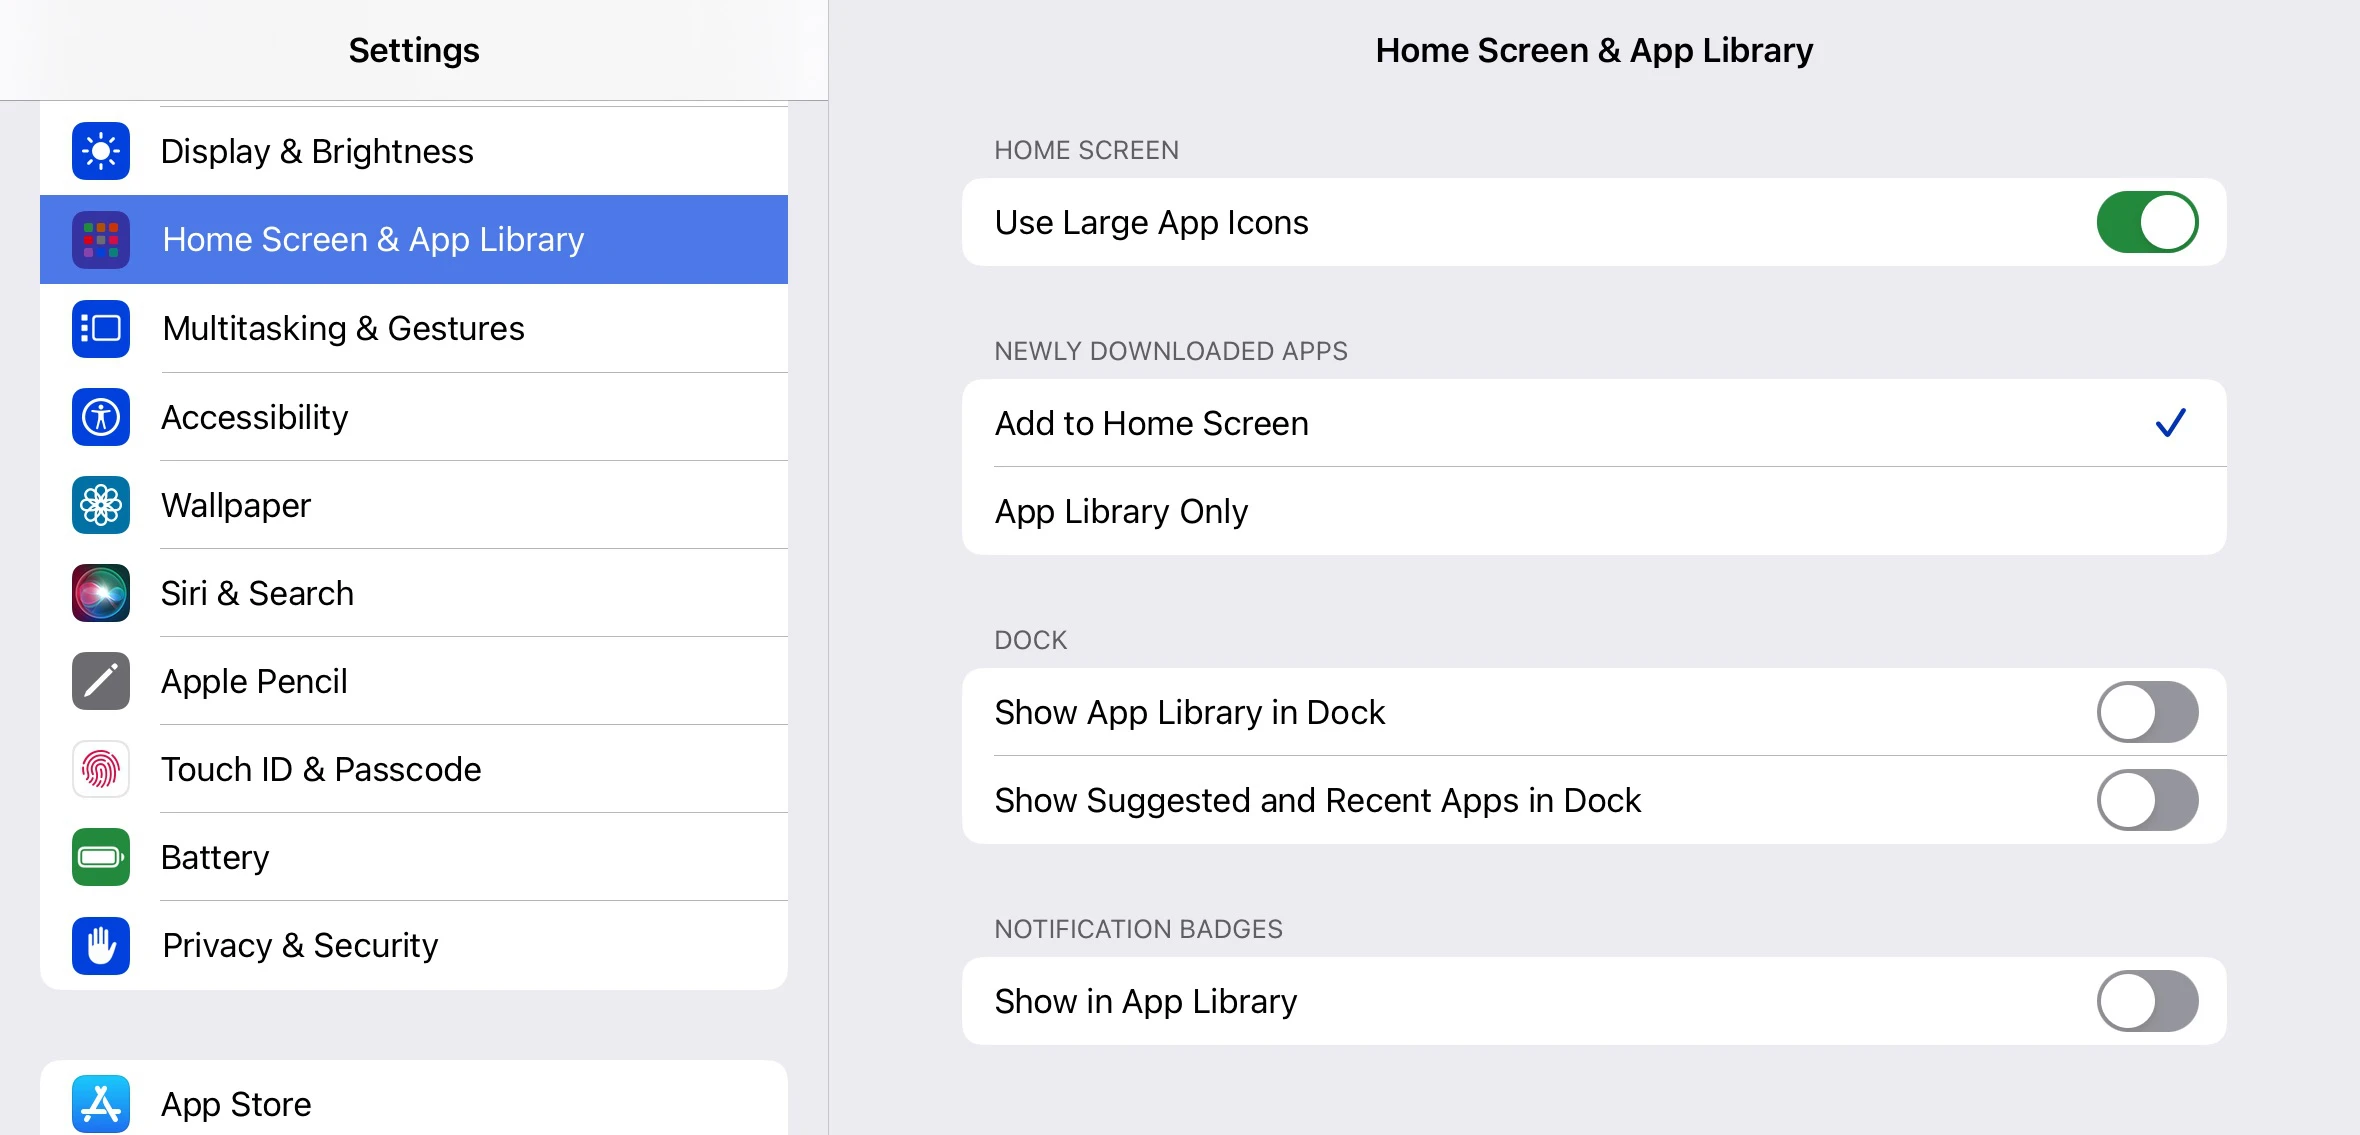 iPadOS 17 home screen and app library settings